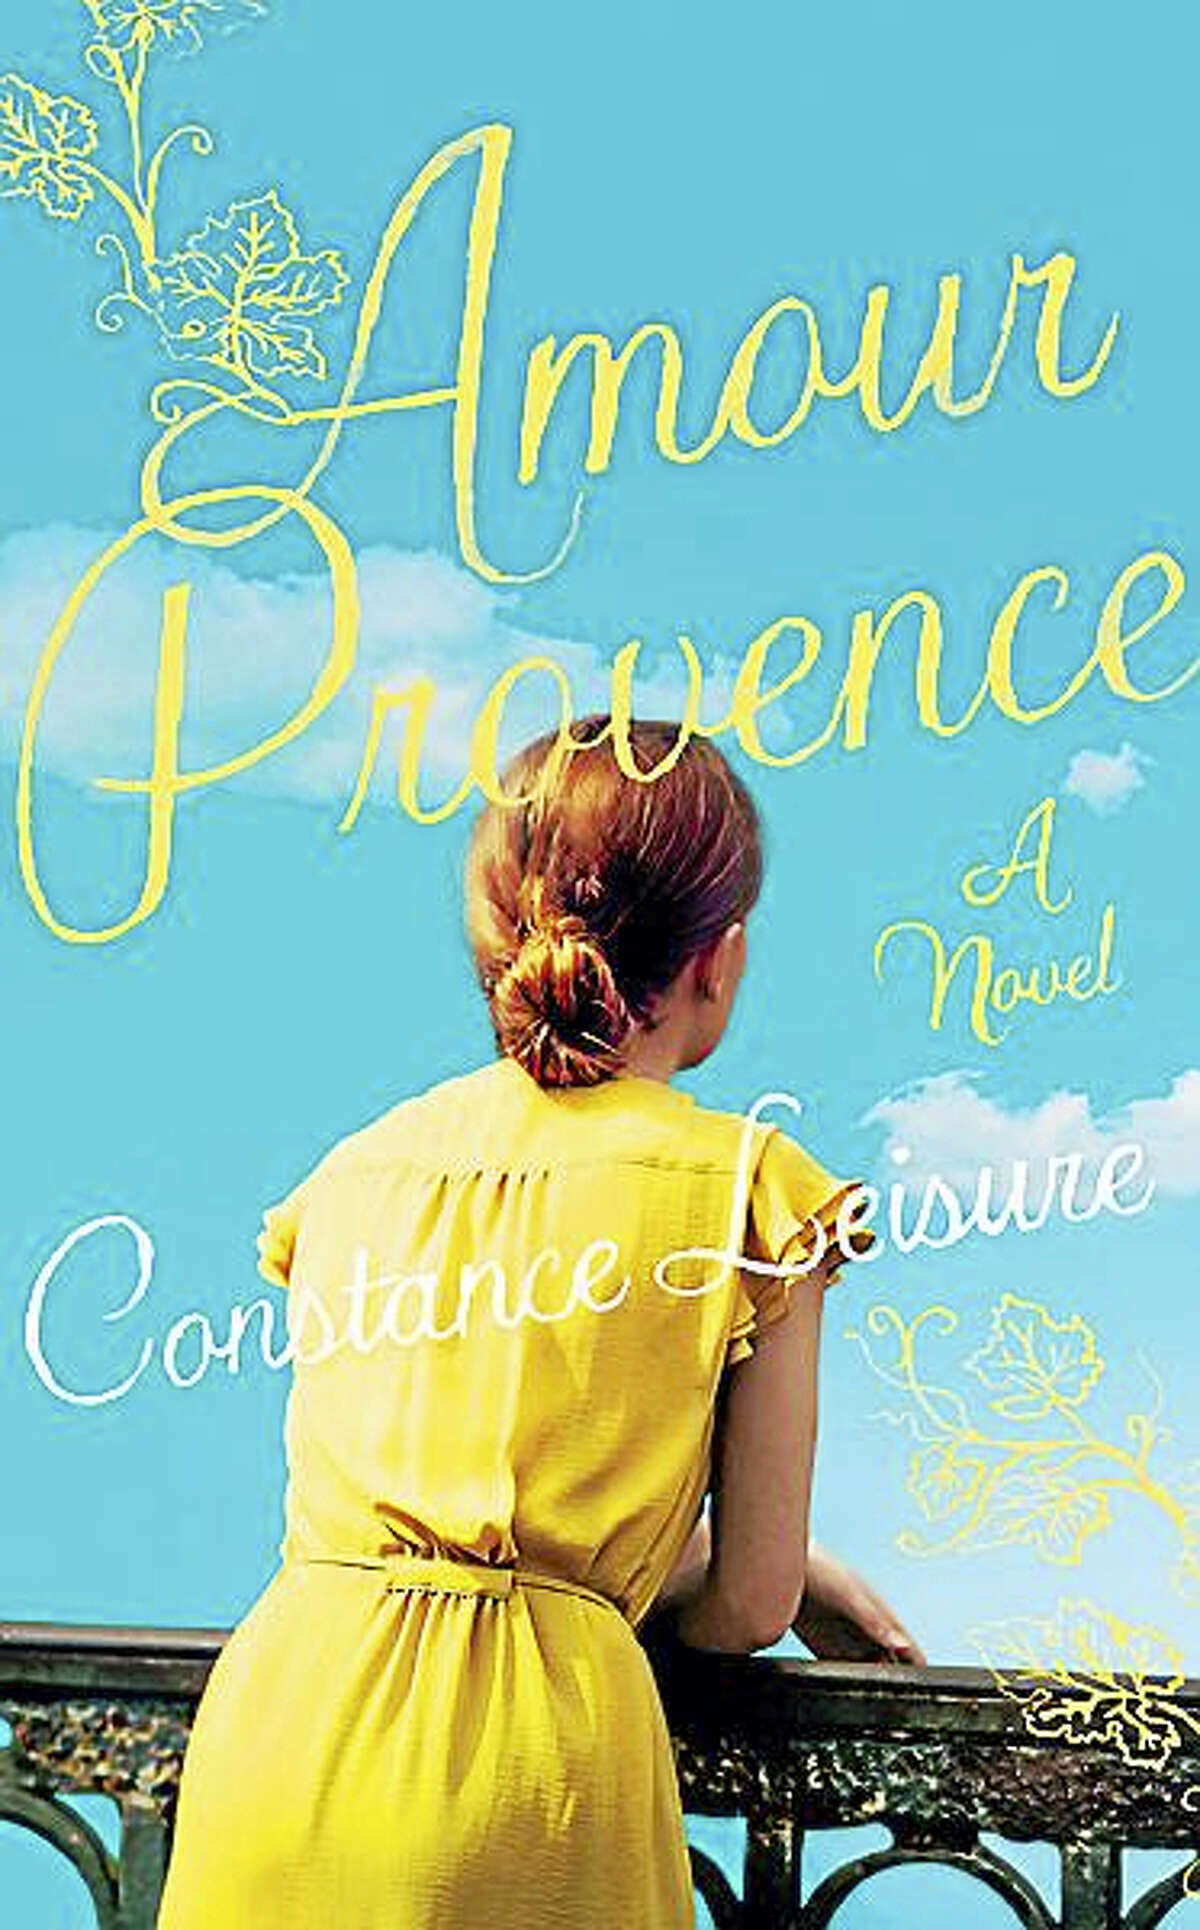 "Amour Provence," a novel by Connie Leisure, weaves a tale of life in a small wine village in the south of France.